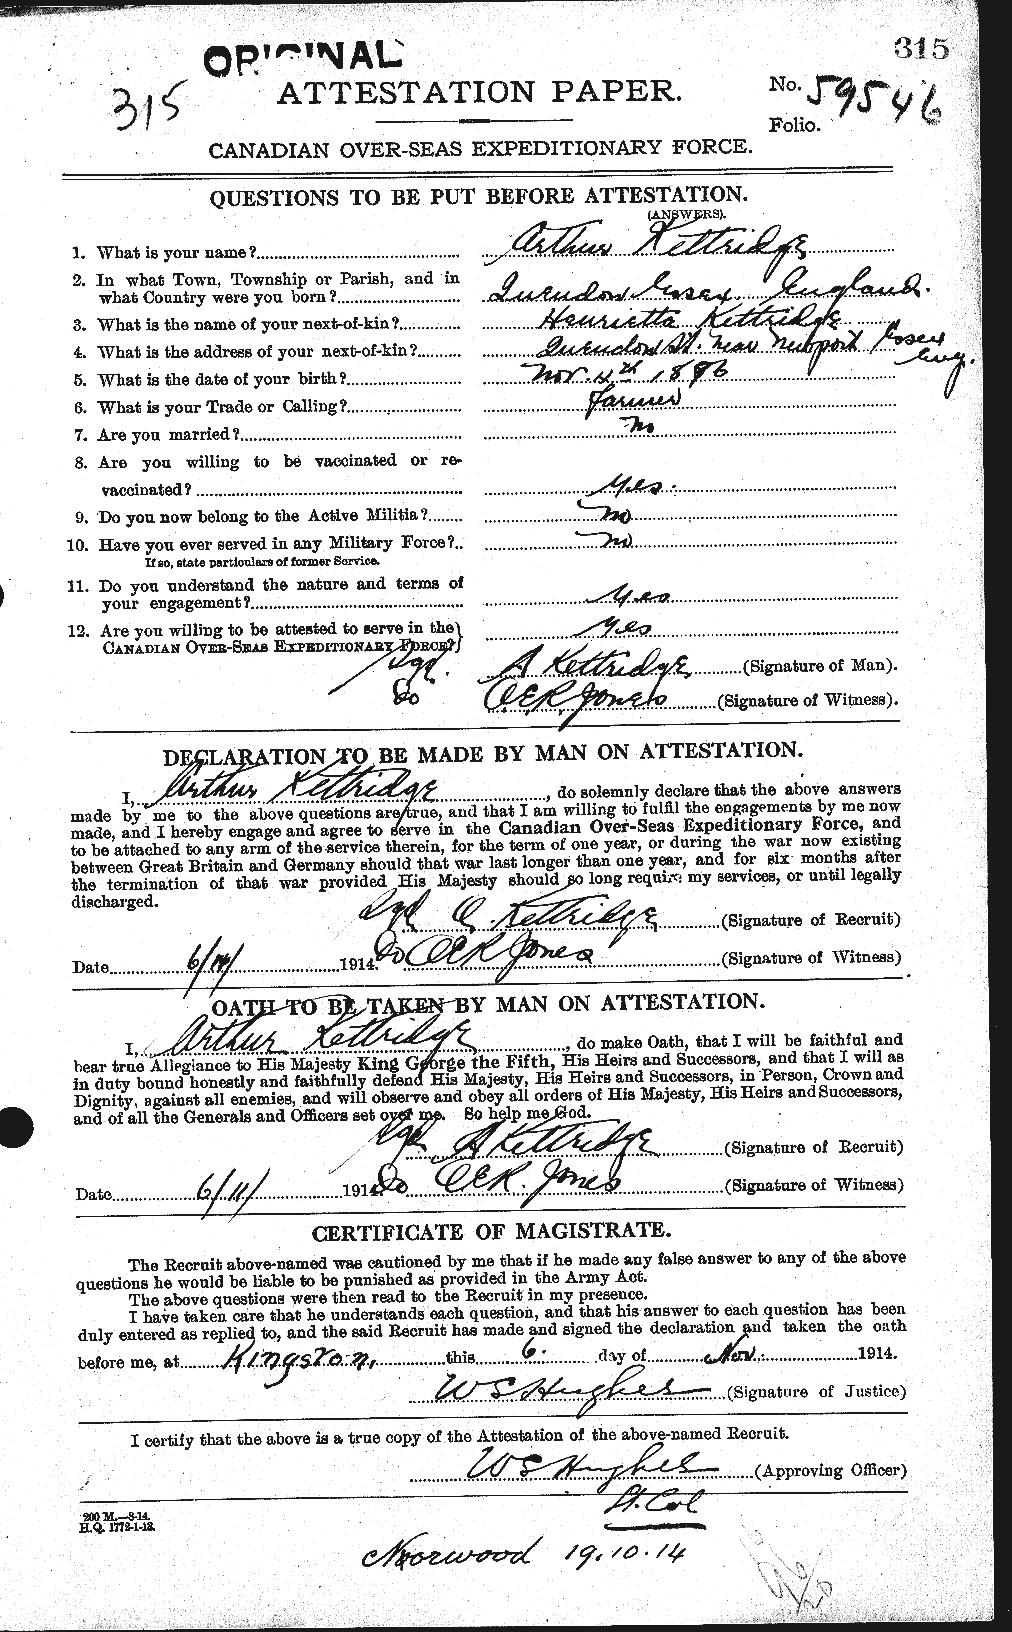 Personnel Records of the First World War - CEF 436419a